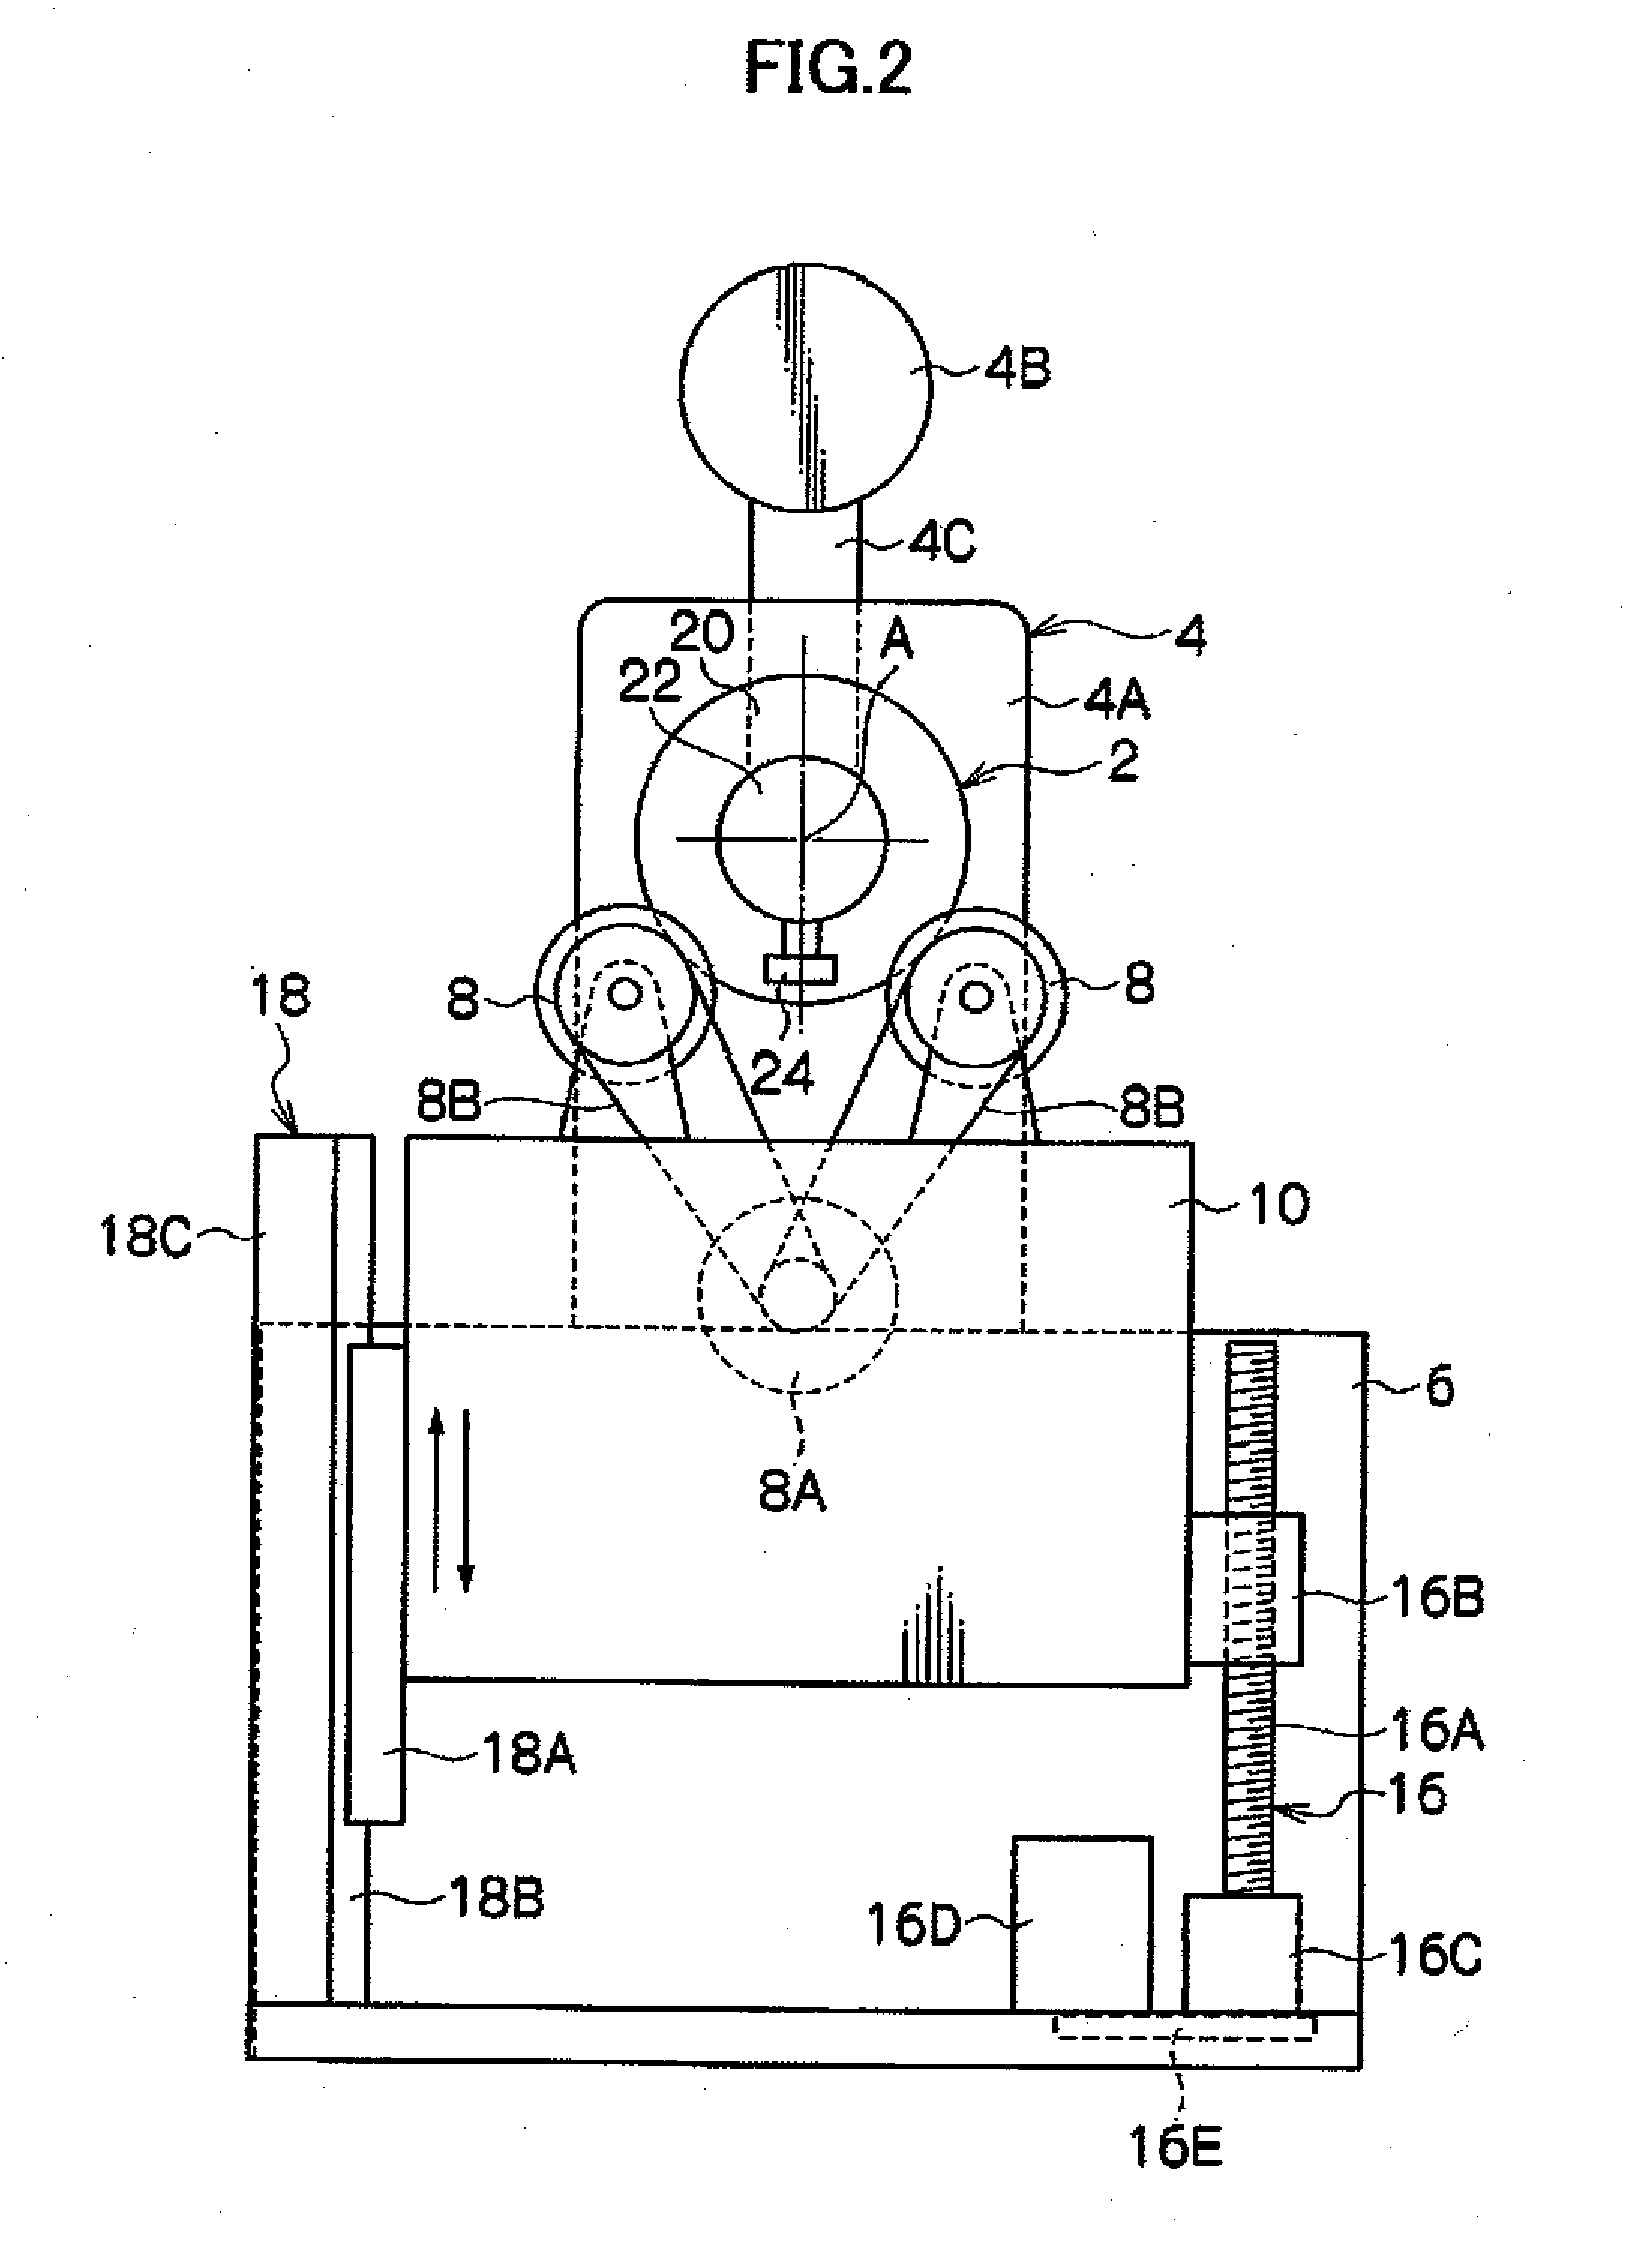 Device and method for forming end of coiled spring